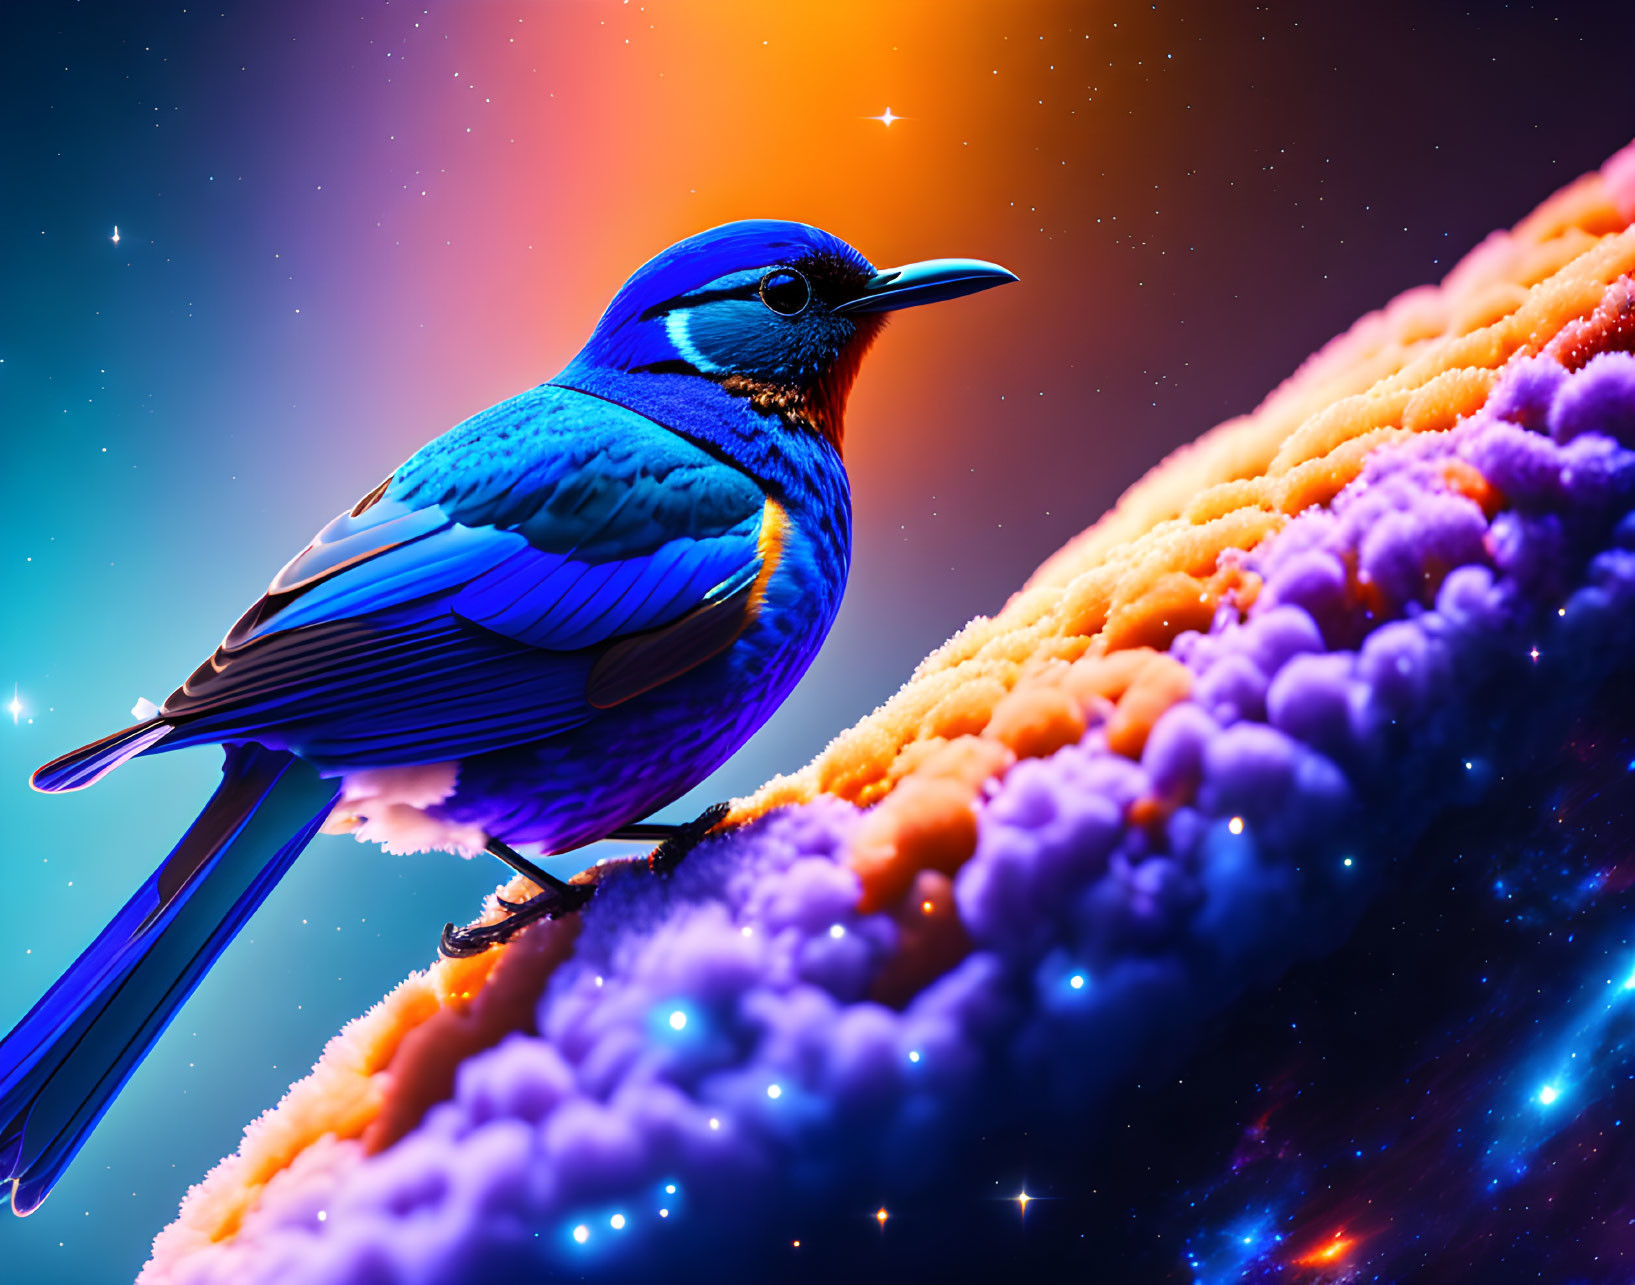 Colorful Blue Bird on Nebula Structure in Cosmic Setting